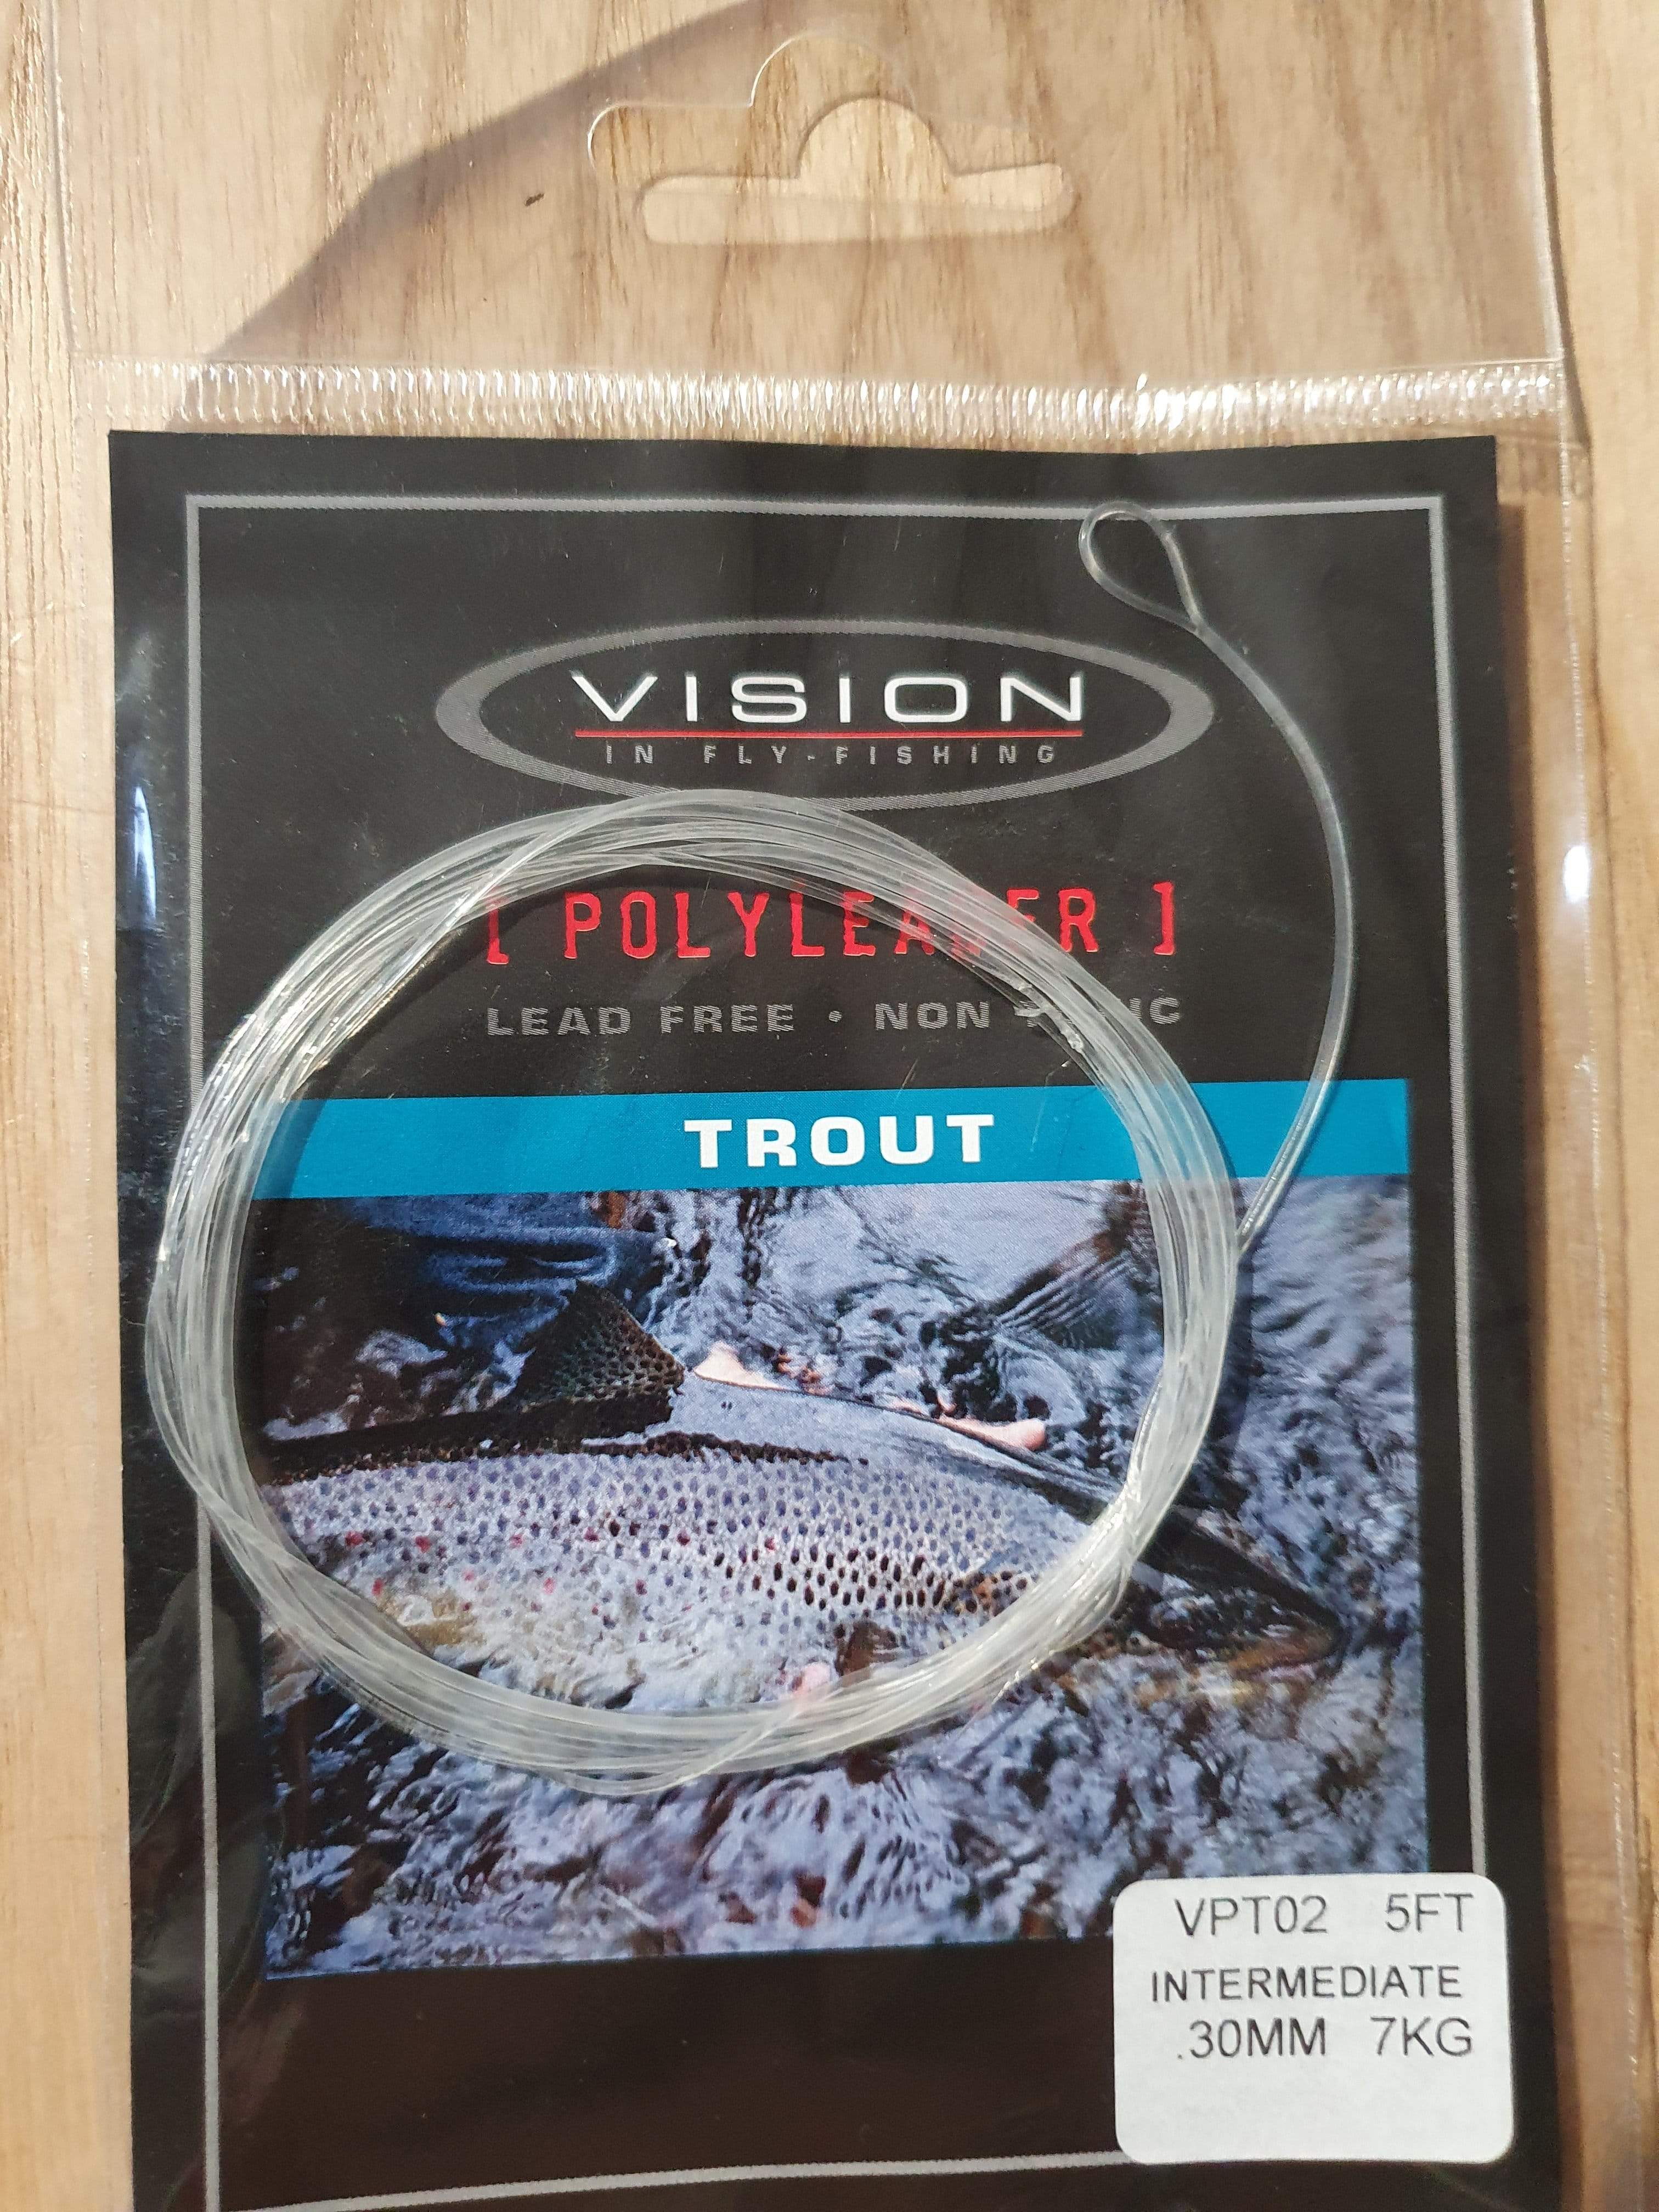 Vision Leaders & Tippets VP702 5FT - 7kg (Intermediate) Vision Polyleader Trout